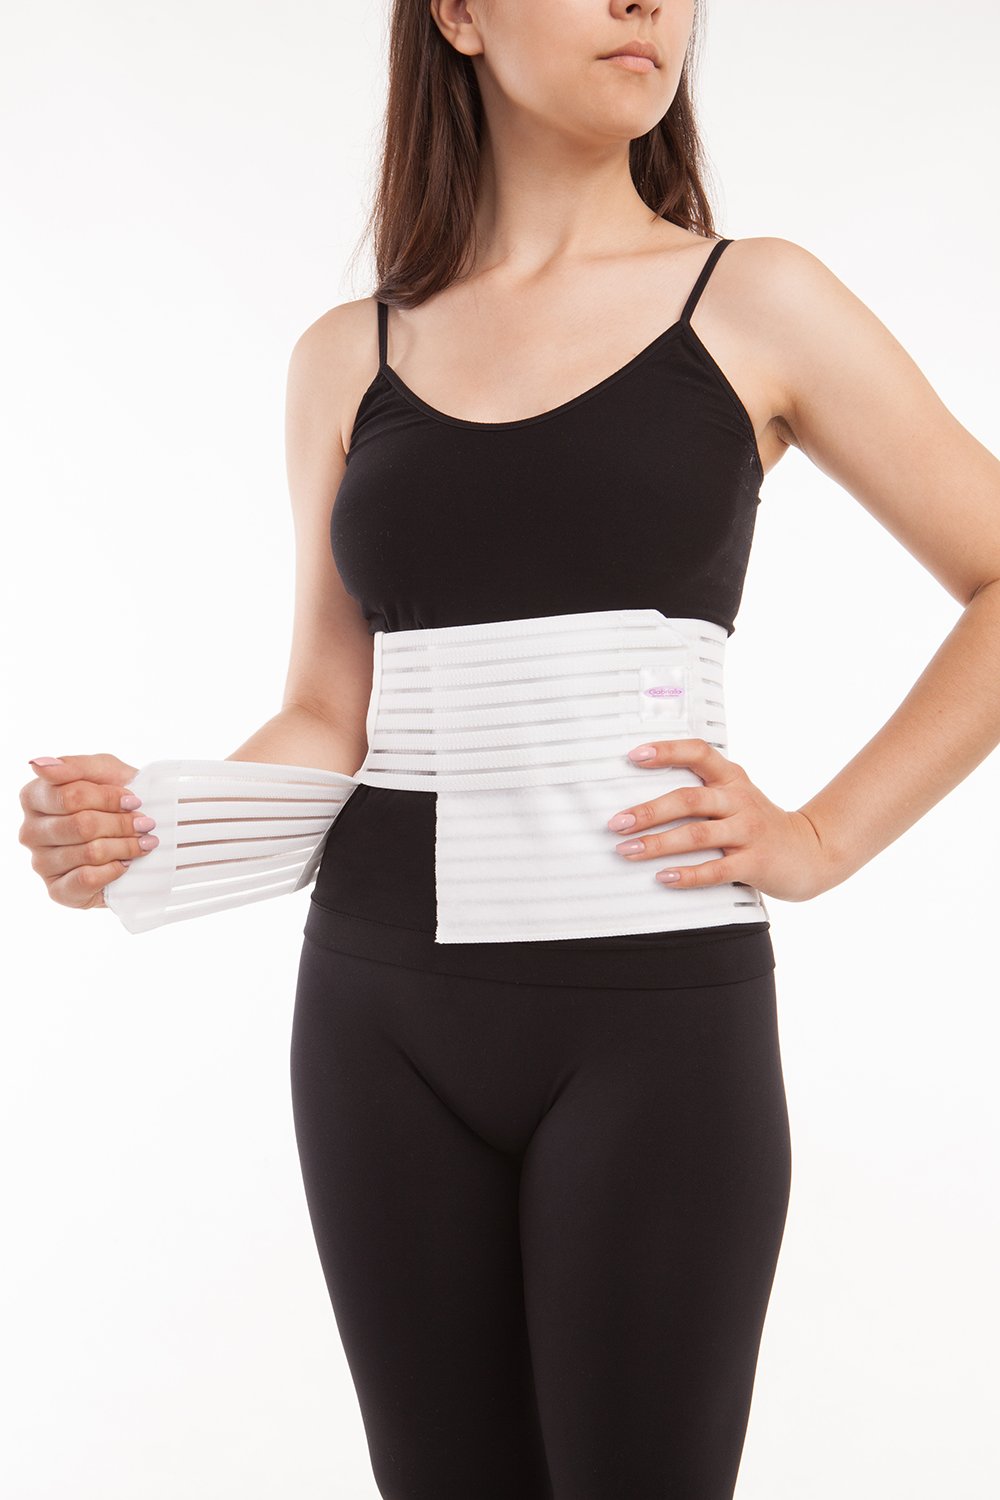 ZOYER Medical - Abdominal Binder and Maternity Back Support